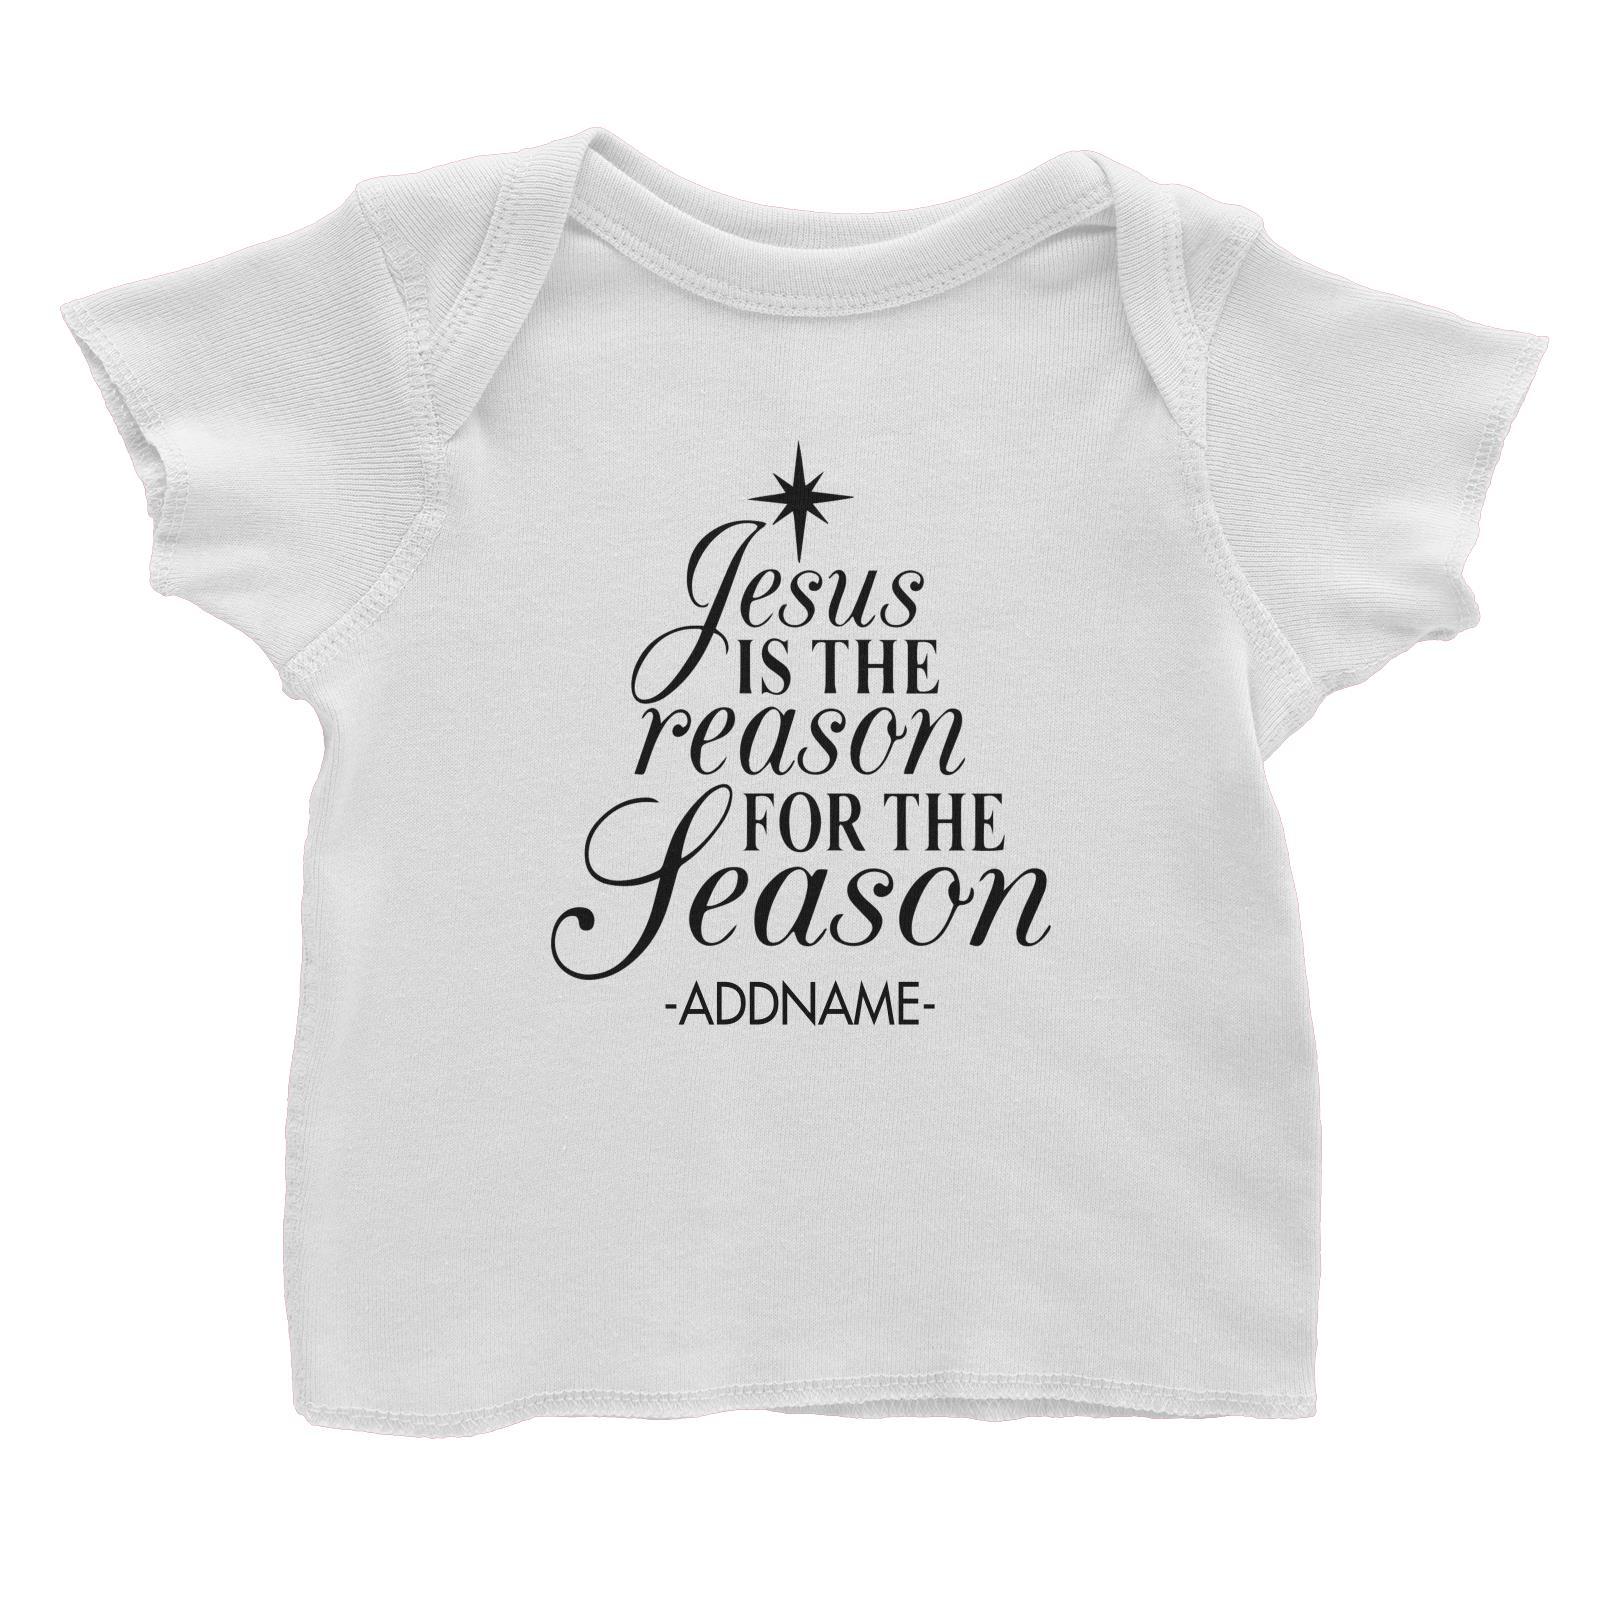 Jesus Is The Reason For The Season Addname Baby T-Shirt Christmas Personalizable Designs Lettering